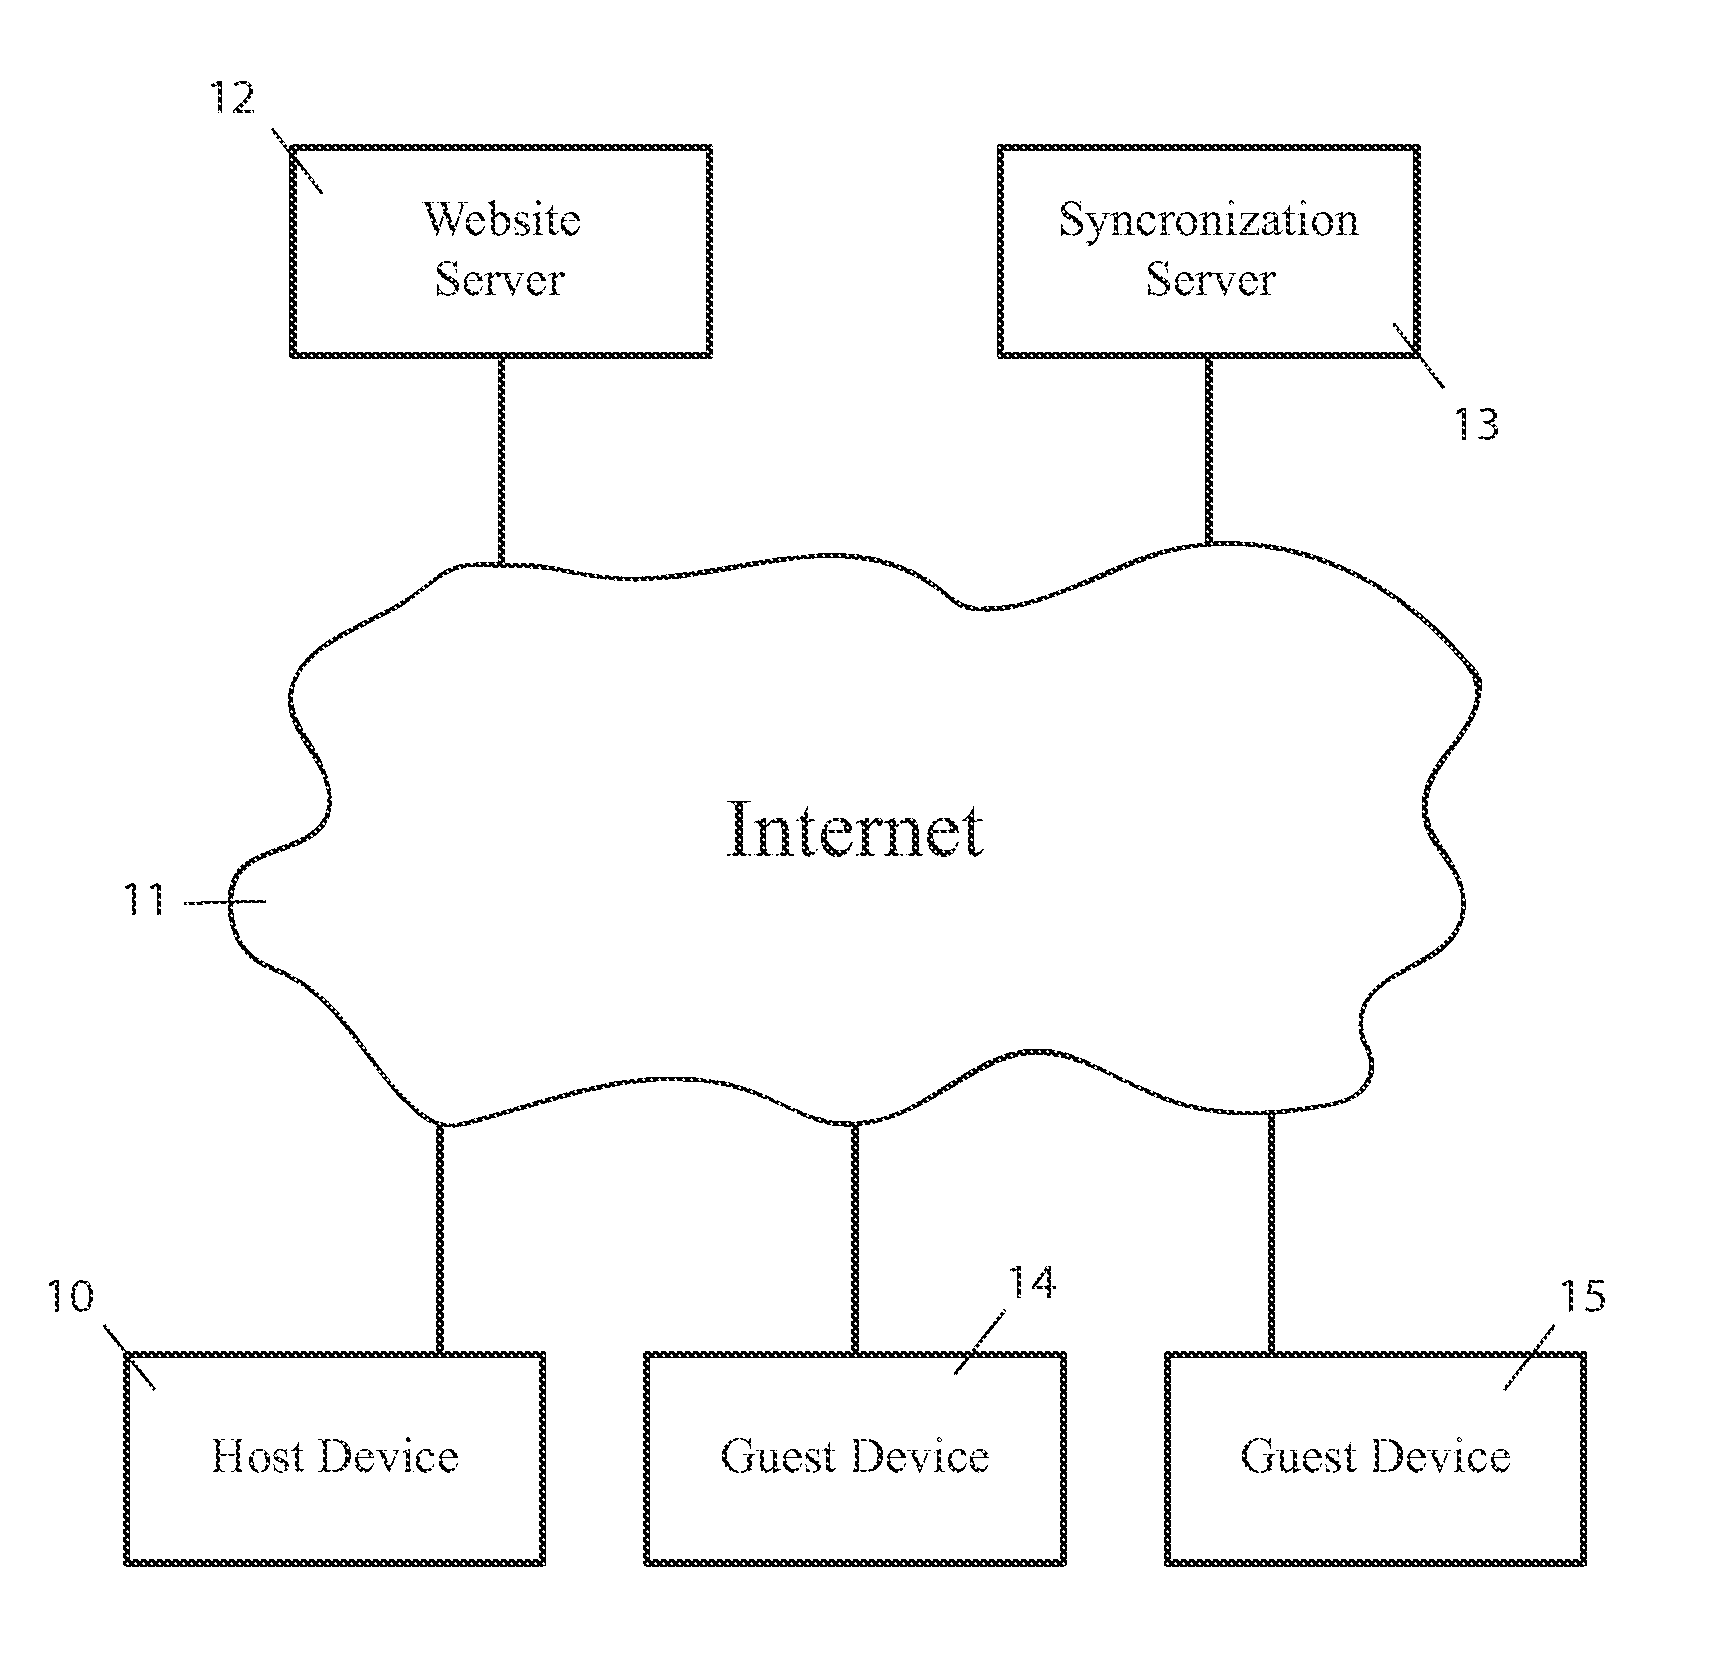 Method and Apparatus for the Implementation of a Real-Time, Sharable Browsing Experience